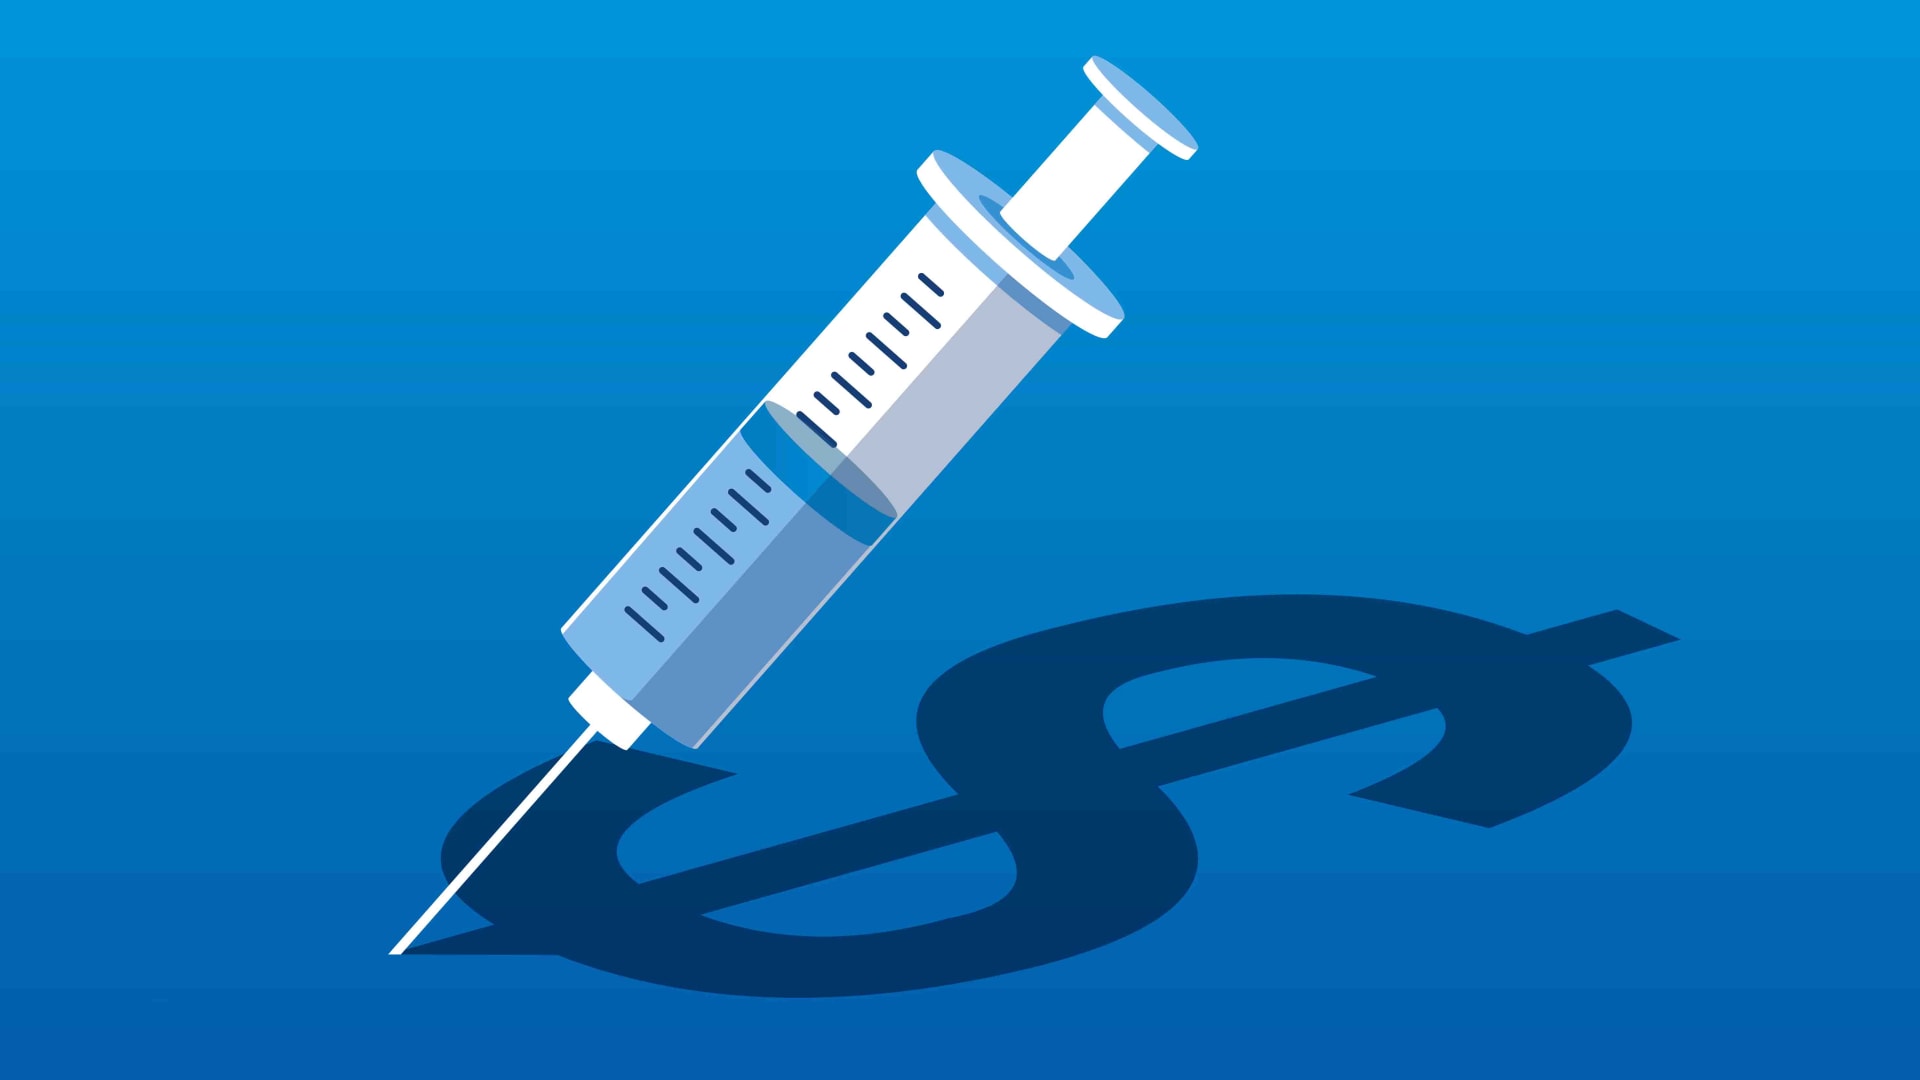 Why Mandating Covid-19 Vaccines Is Good for Business